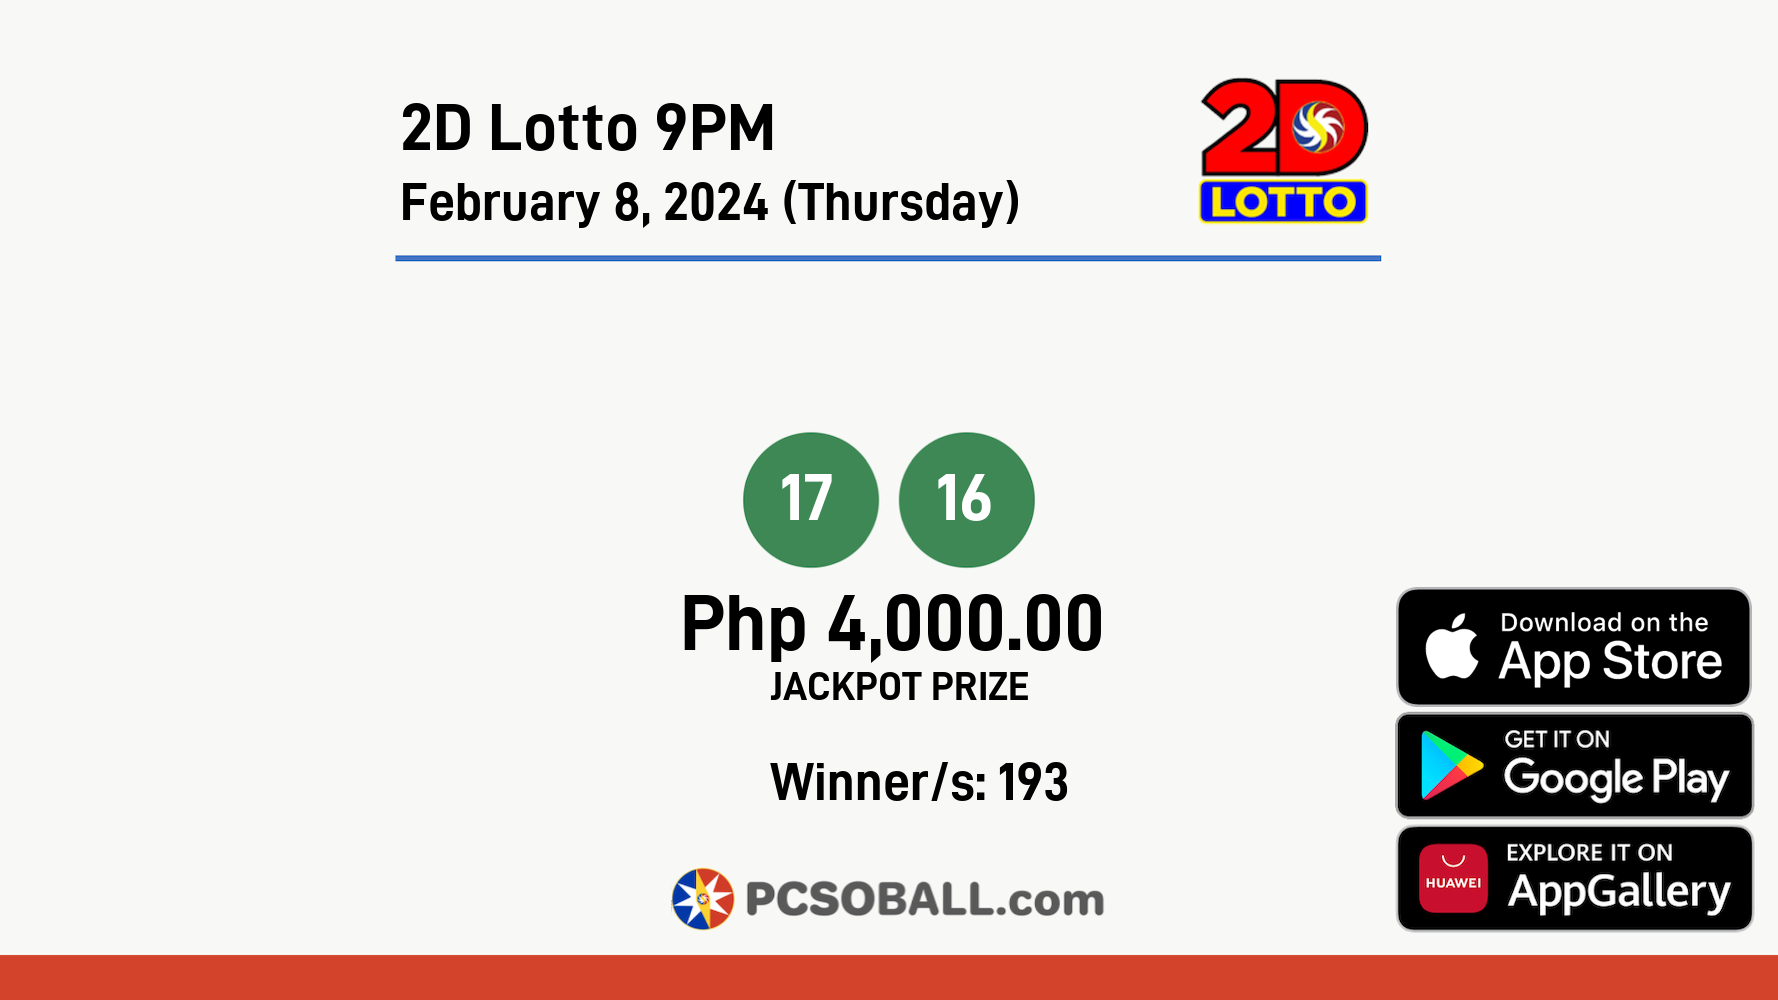 2D Lotto 9PM February 8, 2024 (Thursday) Result